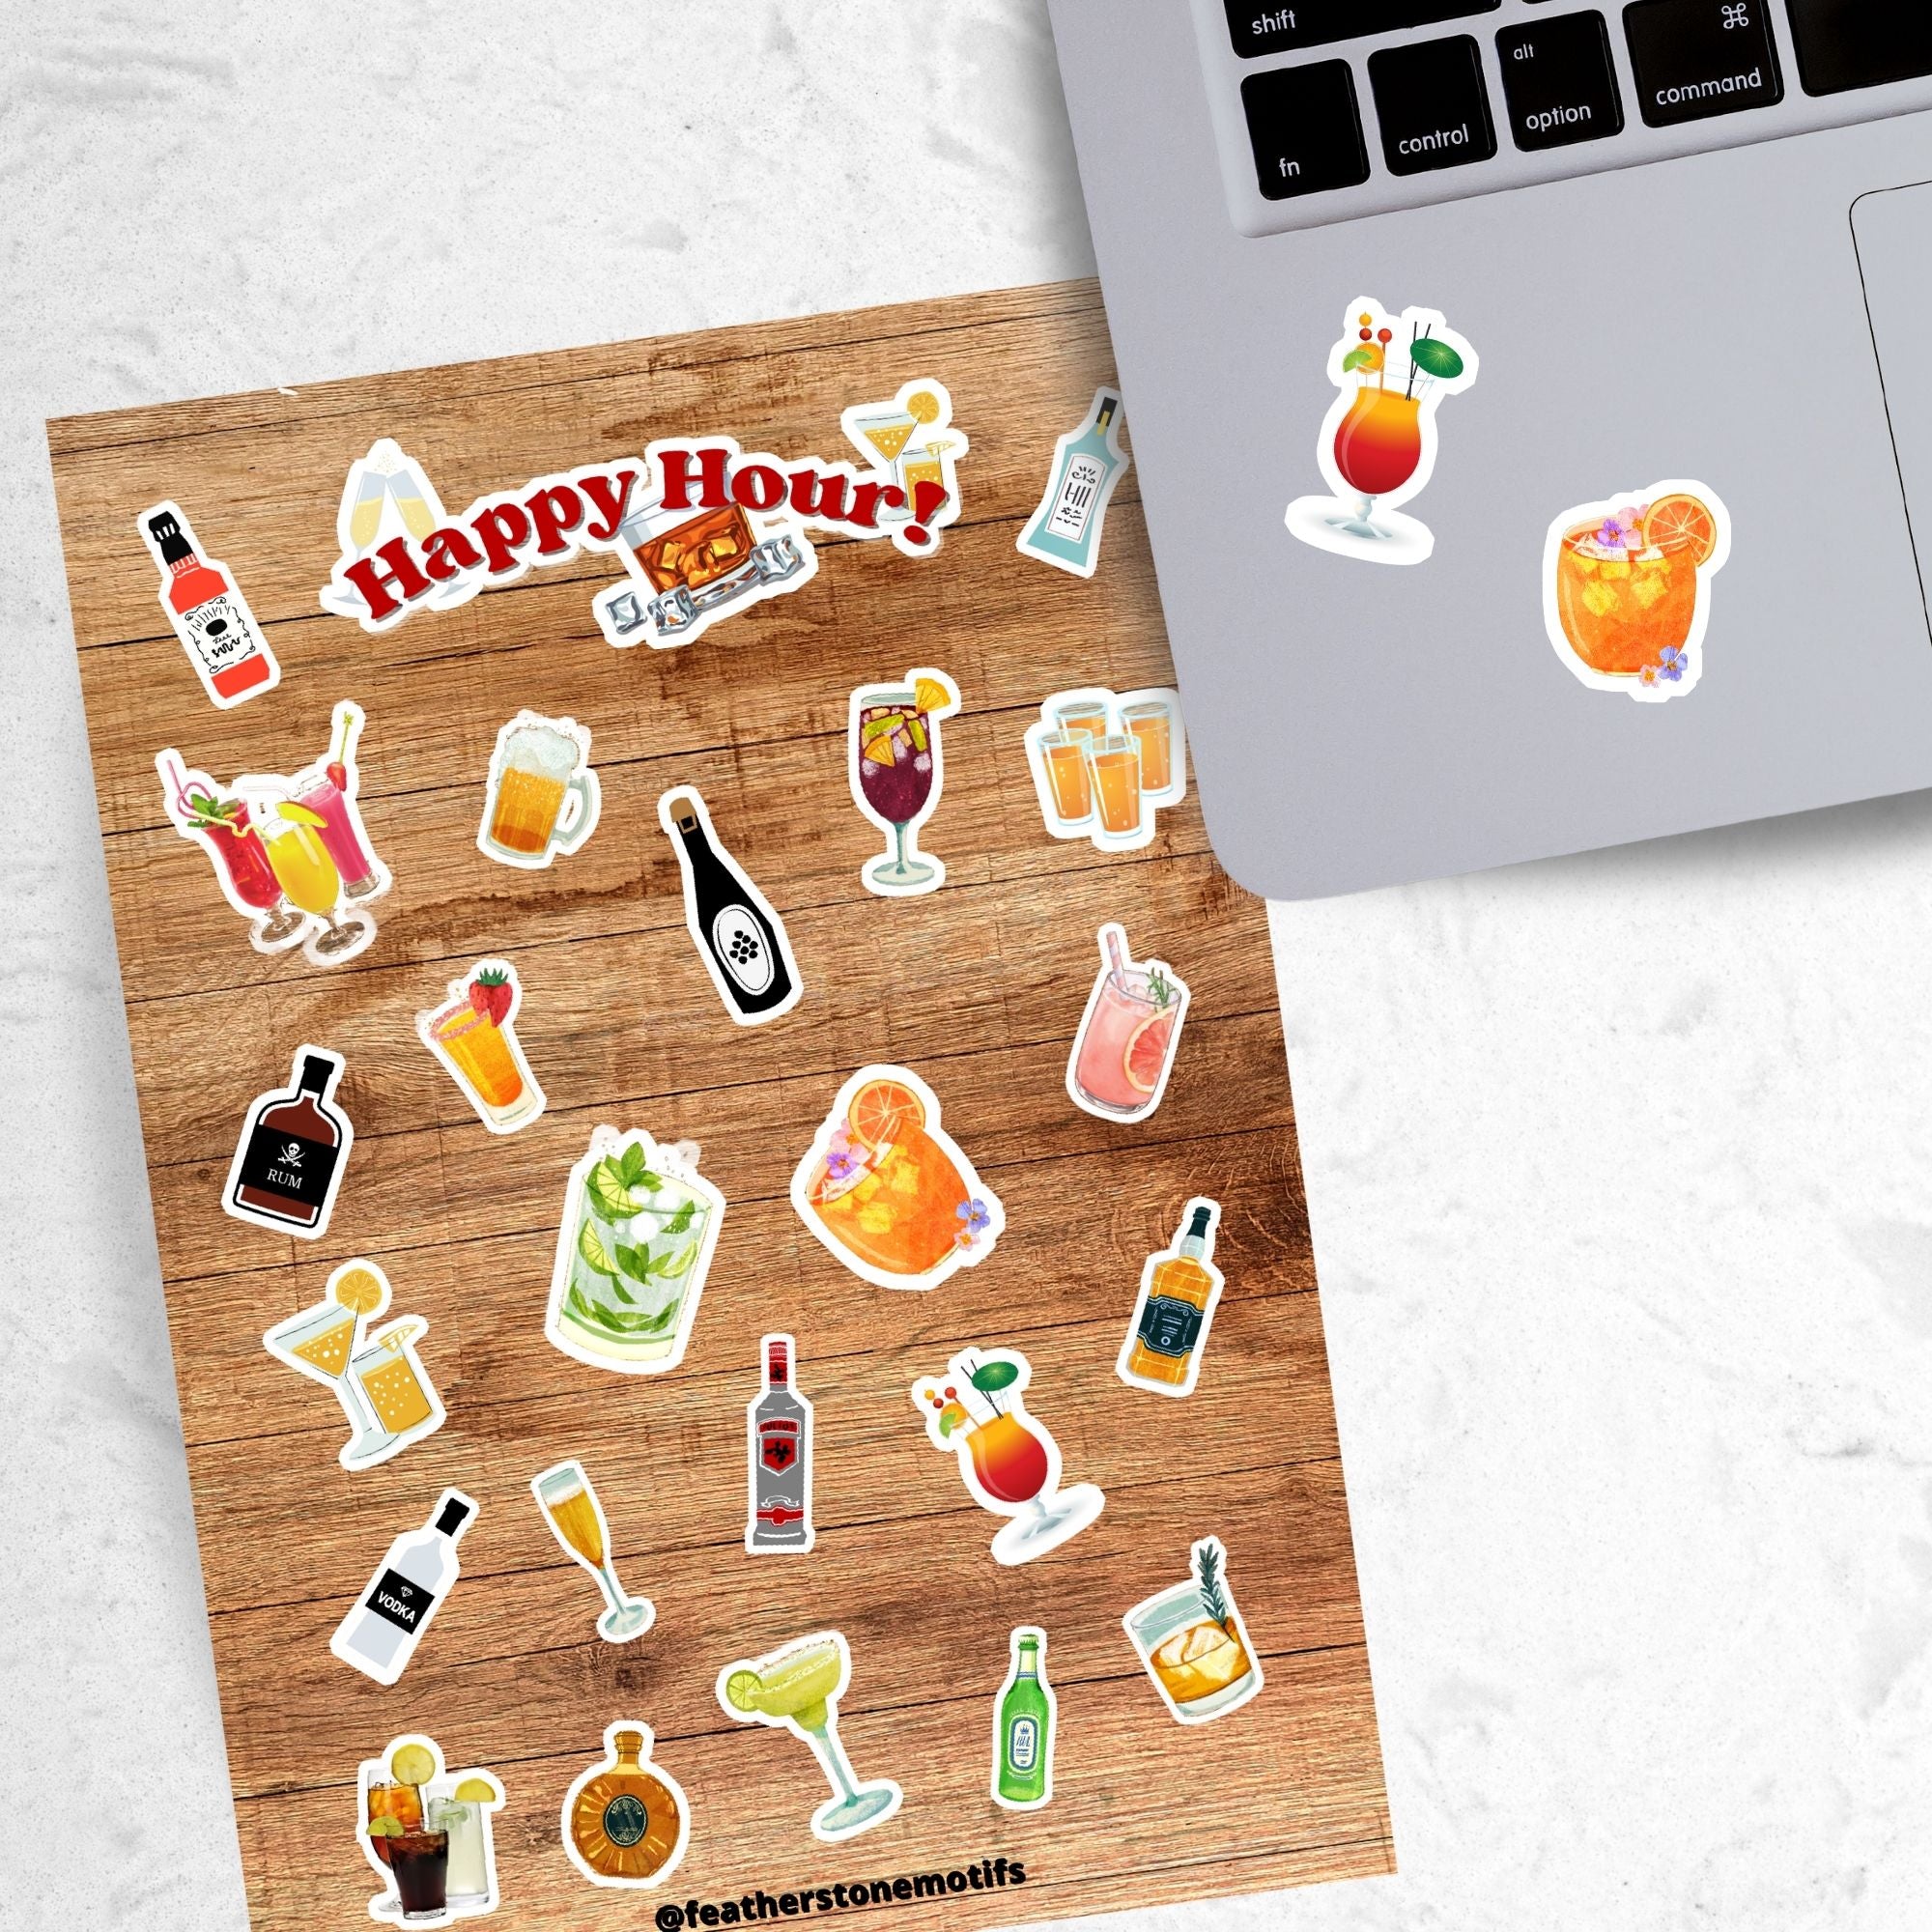 Cheers! Filled with sticker images of your favorite cocktails and adult beverages, this is for adults who can enjoy this sticker sheet responsibly! This image shows the sticker sheet next to an open laptop with stickers of mixed drinks applied below the keyboard.